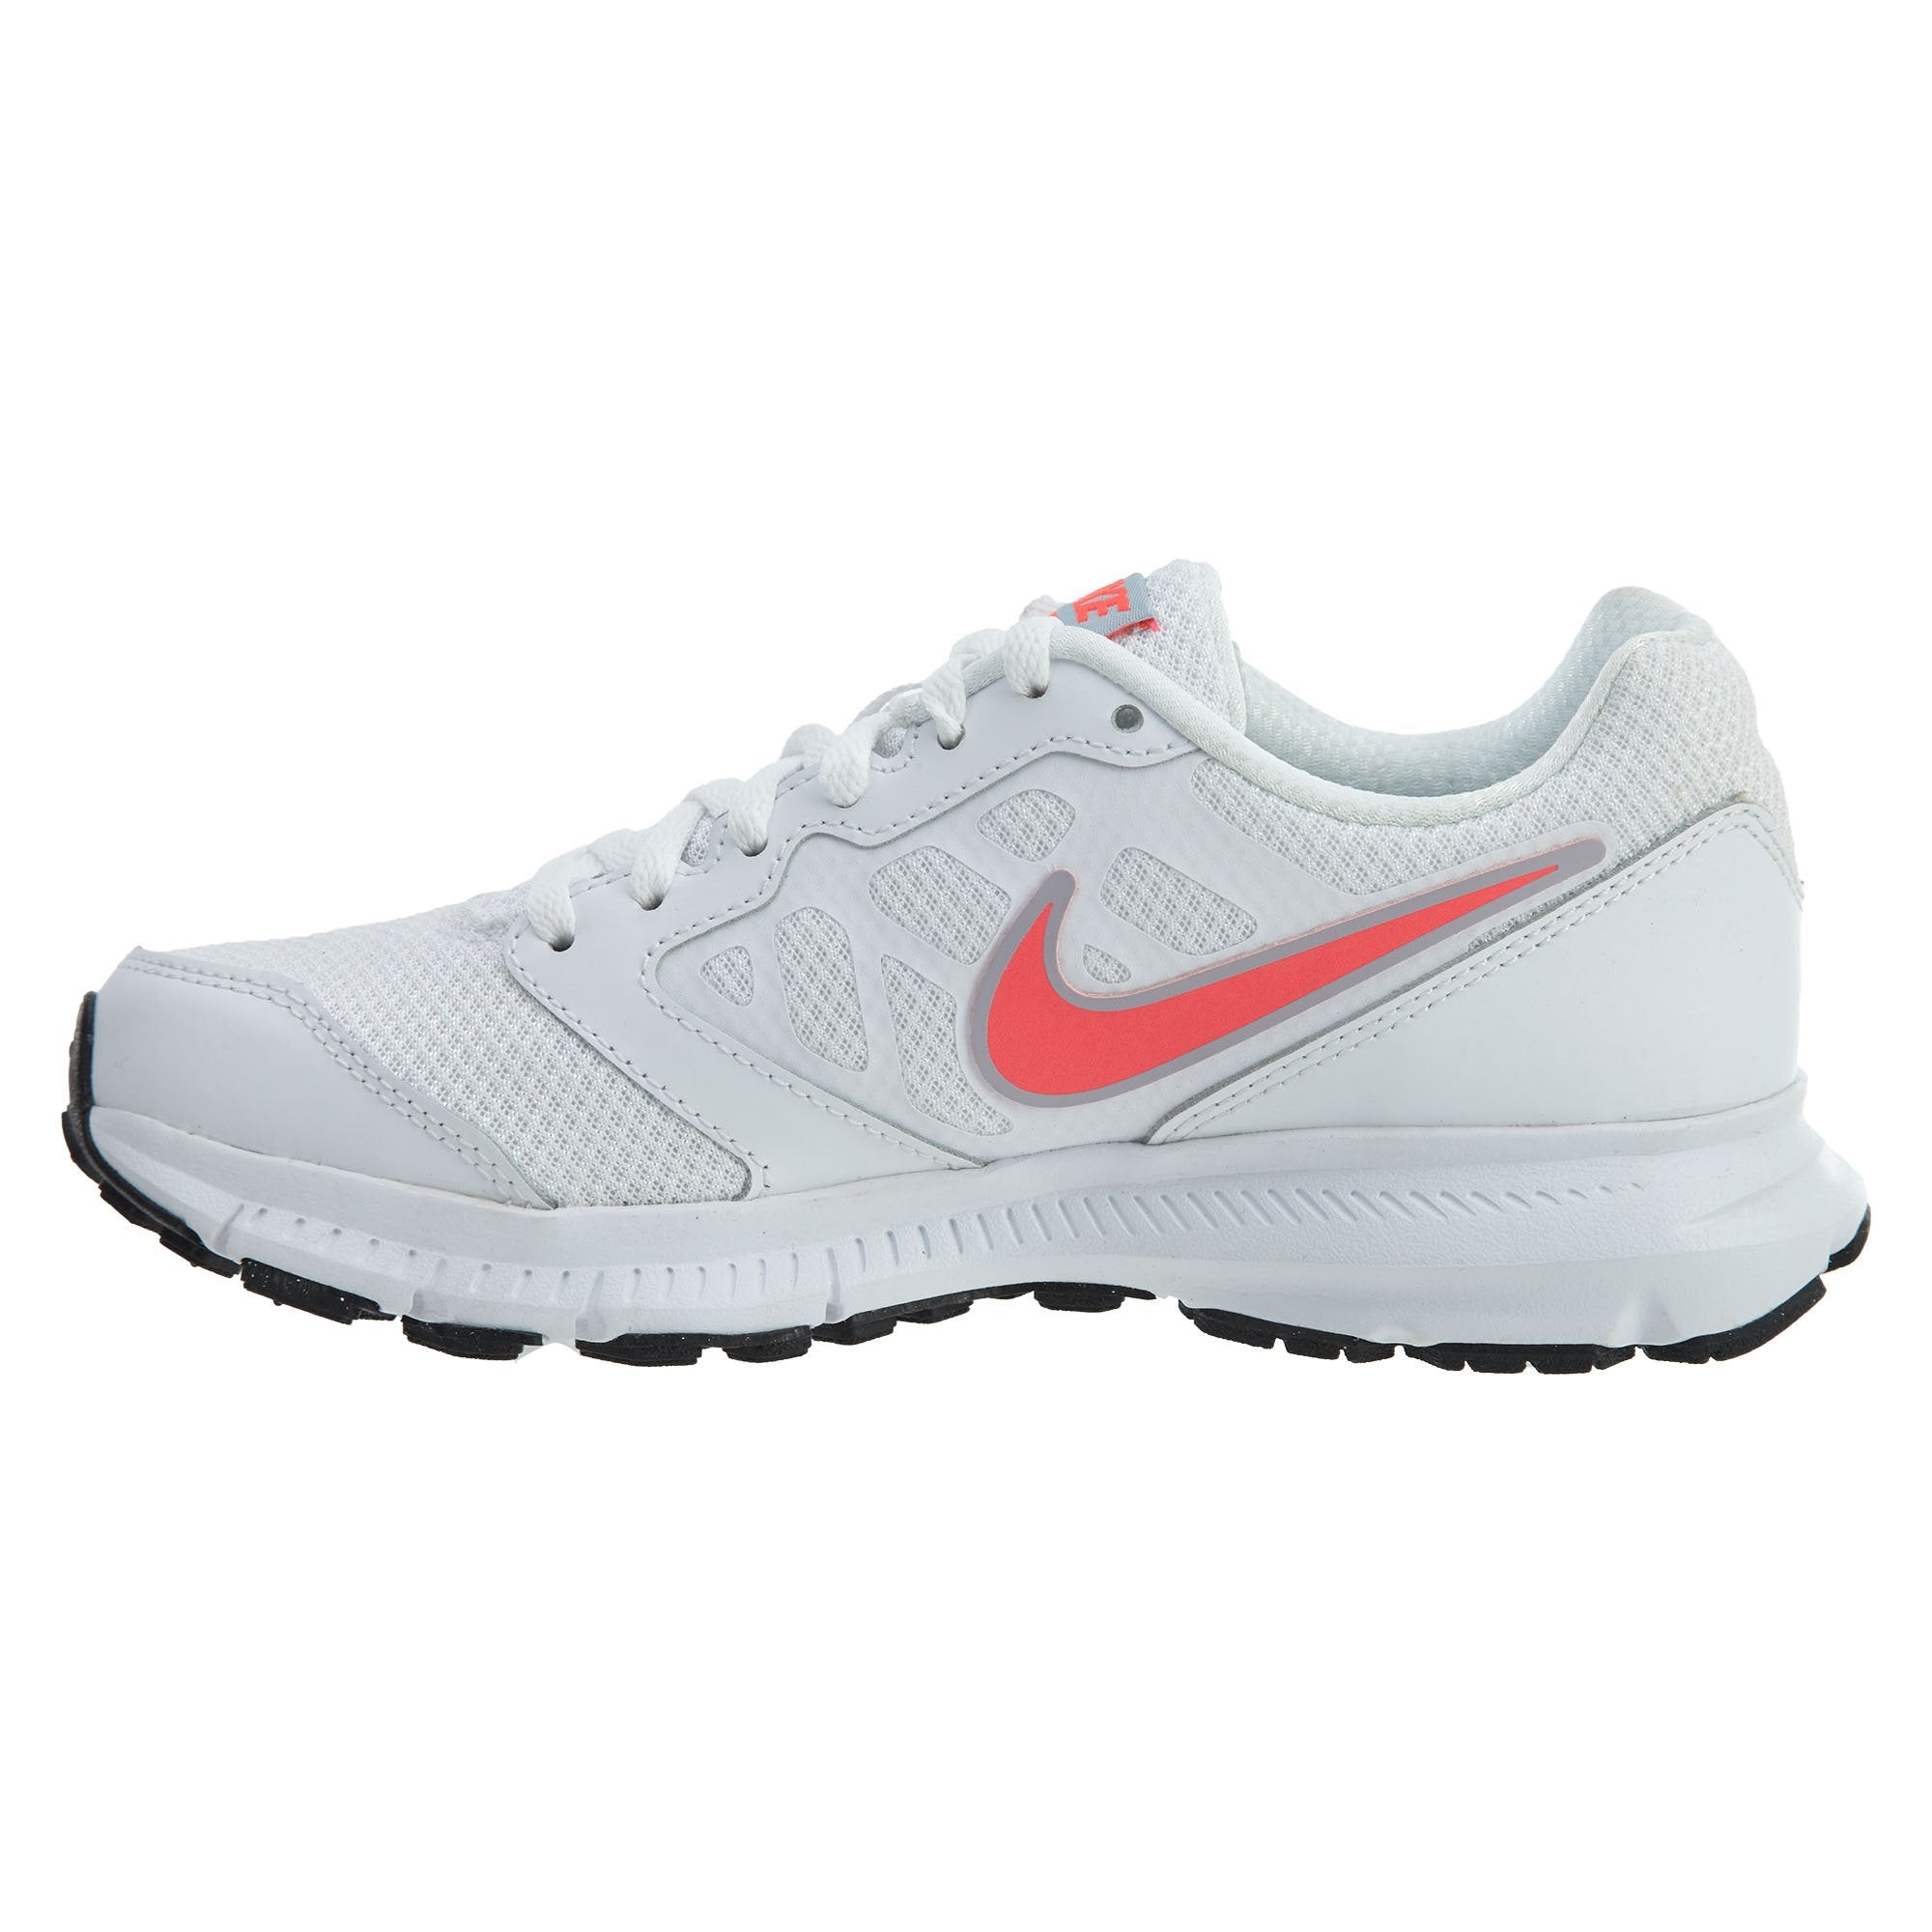 wmns nike downshifter 6